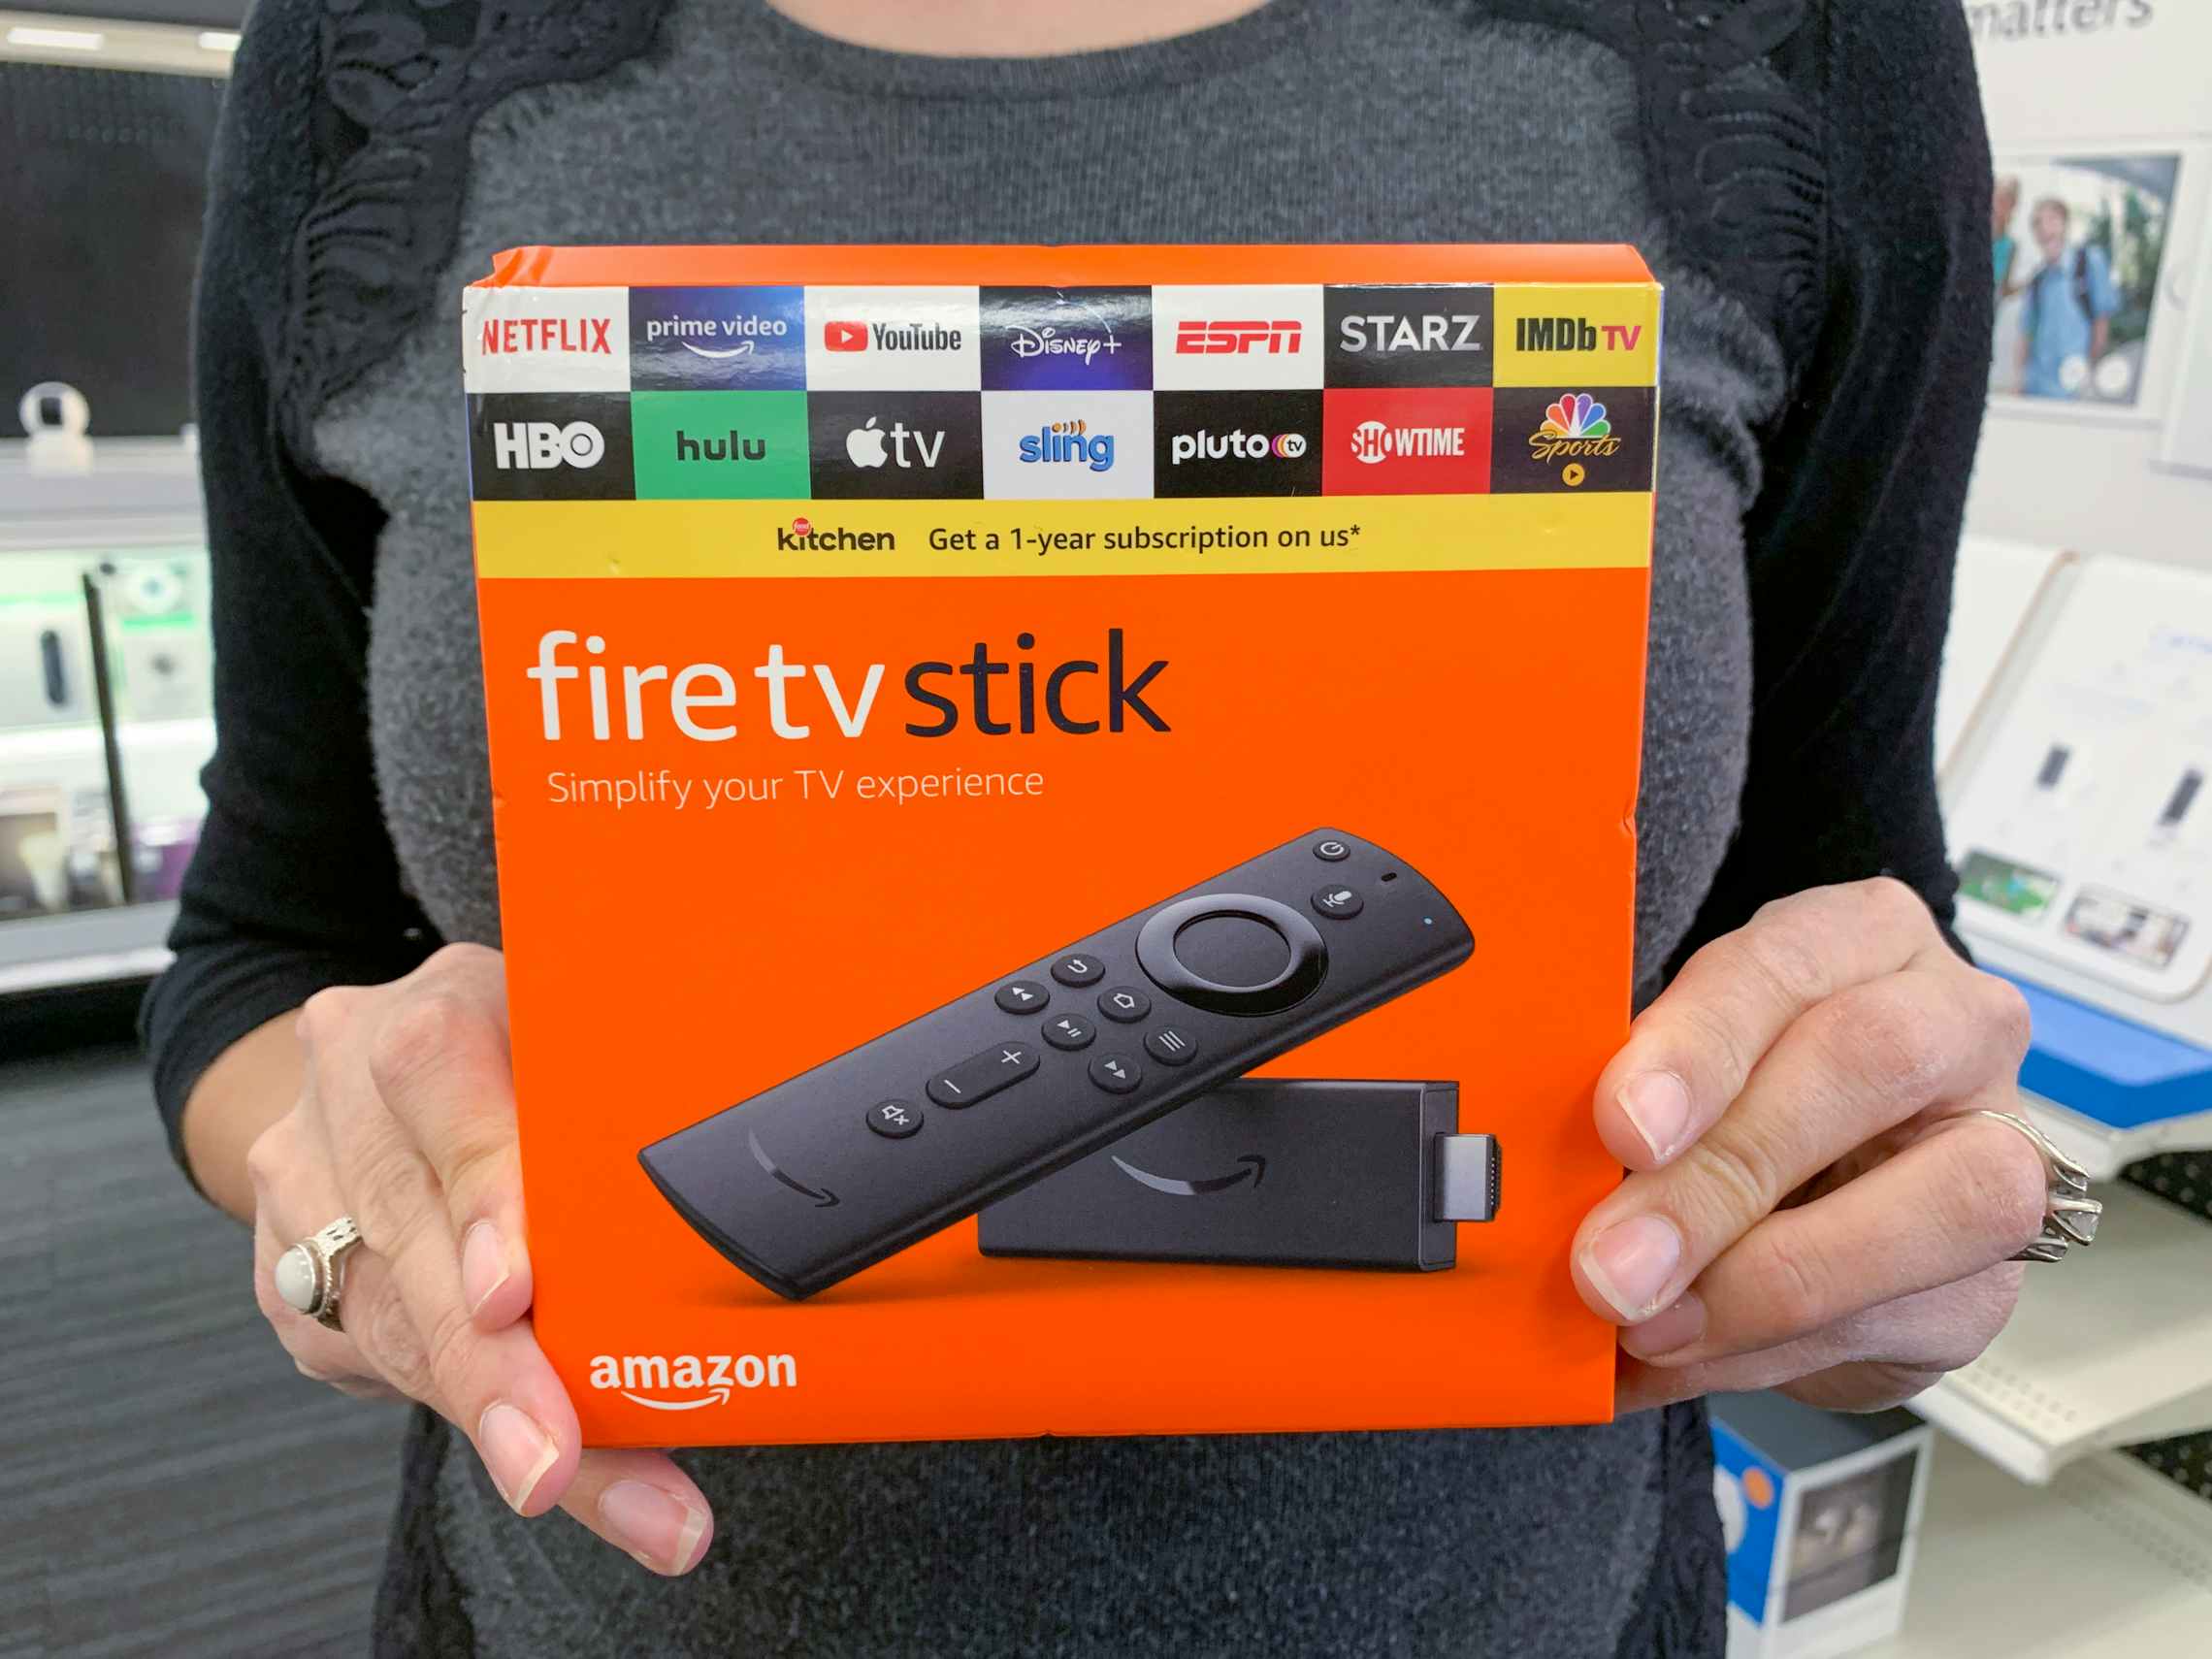 A woman holding an Amazon Fire TV Stick in a store.